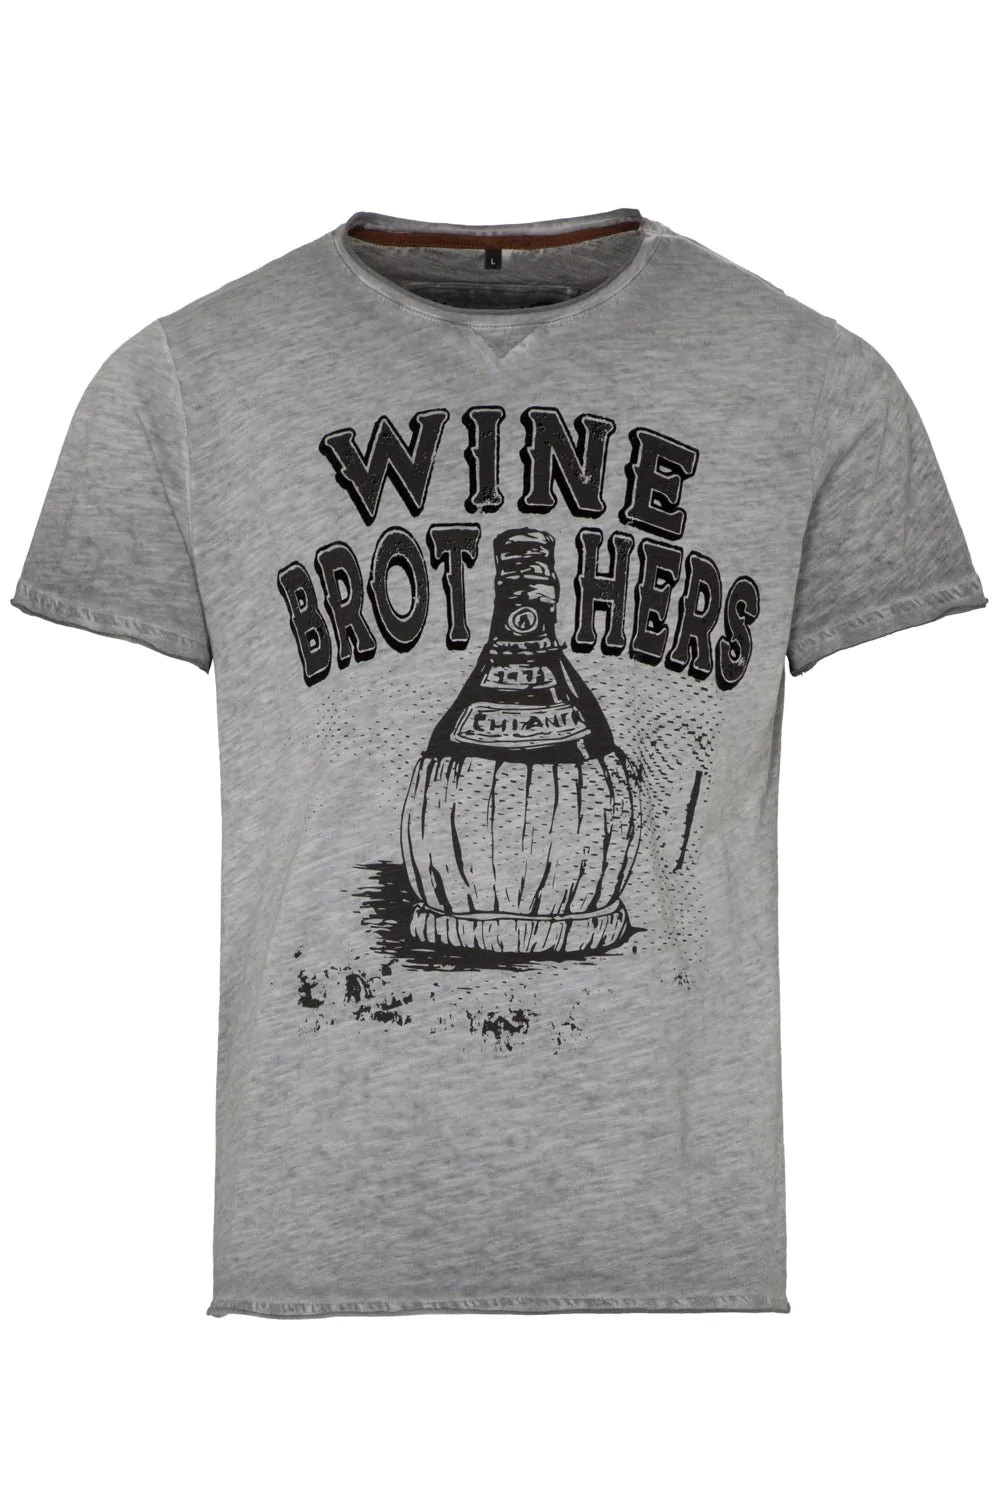 T-Shirt Wine Brothers